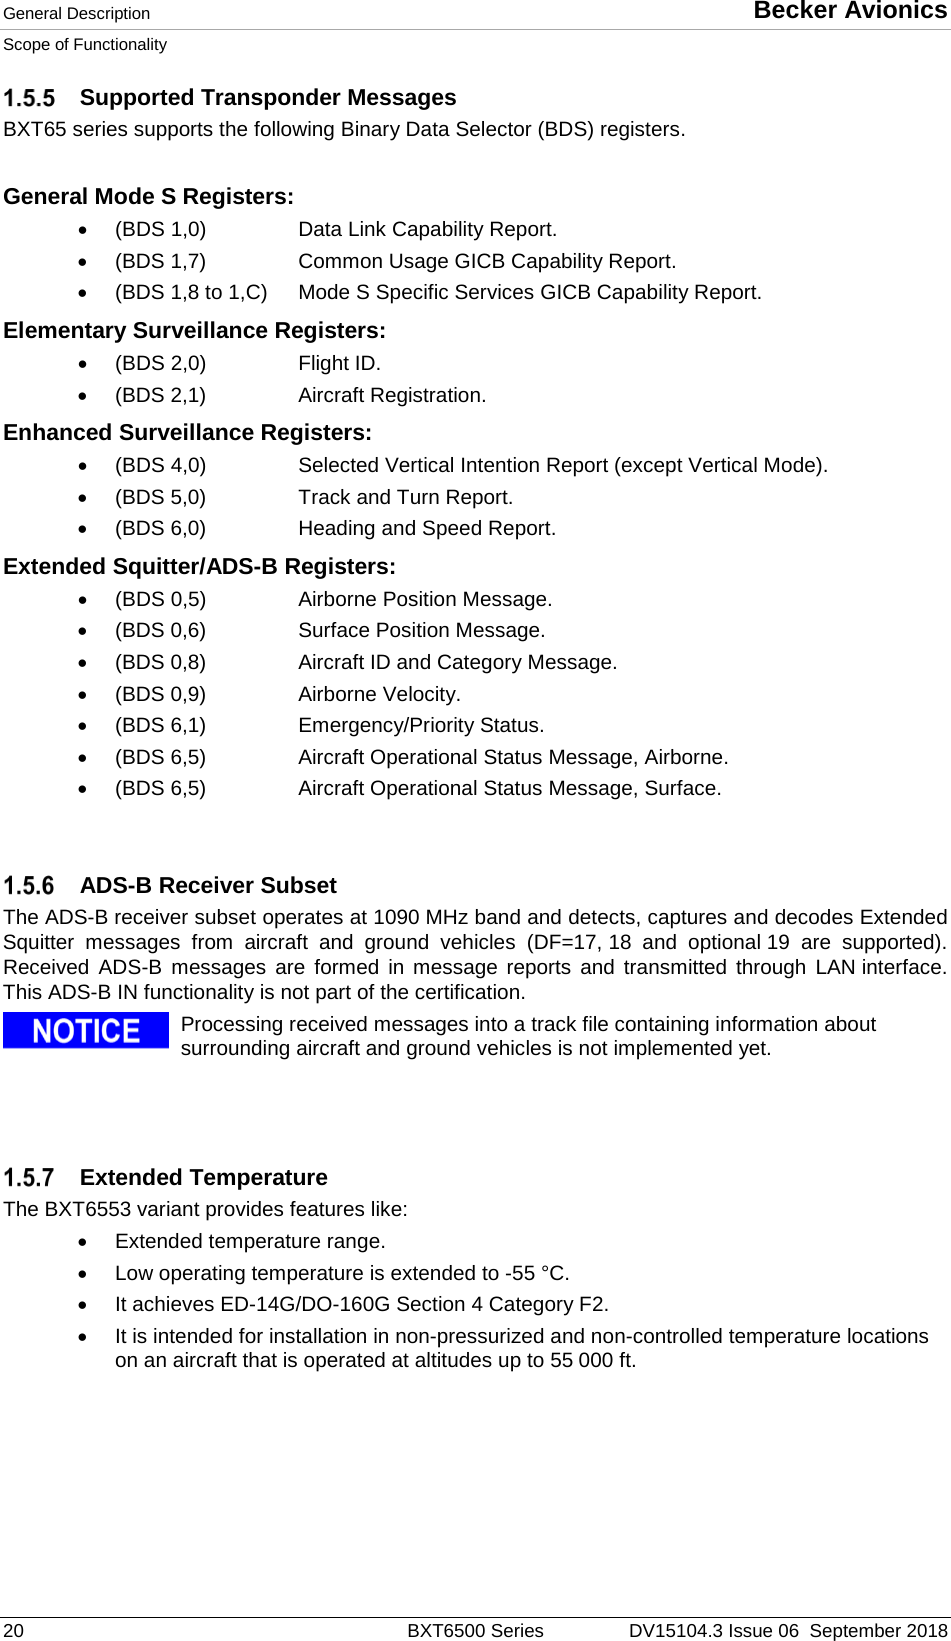 General Description  Becker Avionics Scope of Functionality  20  BXT6500 Series DV15104.3 Issue 06  September 2018  Supported Transponder Messages BXT65 series supports the following Binary Data Selector (BDS) registers.  General Mode S Registers: • (BDS 1,0)    Data Link Capability Report. • (BDS 1,7)    Common Usage GICB Capability Report. • (BDS 1,8 to 1,C) Mode S Specific Services GICB Capability Report. Elementary Surveillance Registers: • (BDS 2,0)    Flight ID. • (BDS 2,1)    Aircraft Registration. Enhanced Surveillance Registers: • (BDS 4,0)    Selected Vertical Intention Report (except Vertical Mode). • (BDS 5,0)    Track and Turn Report. • (BDS 6,0)    Heading and Speed Report. Extended Squitter/ADS-B Registers: • (BDS 0,5)    Airborne Position Message. • (BDS 0,6)    Surface Position Message. • (BDS 0,8)    Aircraft ID and Category Message. • (BDS 0,9)    Airborne Velocity.  • (BDS 6,1)    Emergency/Priority Status. • (BDS 6,5)    Aircraft Operational Status Message, Airborne. • (BDS 6,5)    Aircraft Operational Status Message, Surface.     ADS-B Receiver Subset The ADS-B receiver subset operates at 1090 MHz band and detects, captures and decodes Extended Squitter messages from aircraft and ground vehicles (DF=17, 18 and optional 19 are supported). Received ADS-B messages are formed in message reports and transmitted through LAN interface. This ADS-B IN functionality is not part of the certification.   Processing received messages into a track file containing information about surrounding aircraft and ground vehicles is not implemented yet.       Extended Temperature The BXT6553 variant provides features like: •  Extended temperature range.  •  Low operating temperature is extended to -55 °C.  • It achieves ED-14G/DO-160G Section 4 Category F2. • It is intended for installation in non-pressurized and non-controlled temperature locations on an aircraft that is operated at altitudes up to 55 000 ft.  